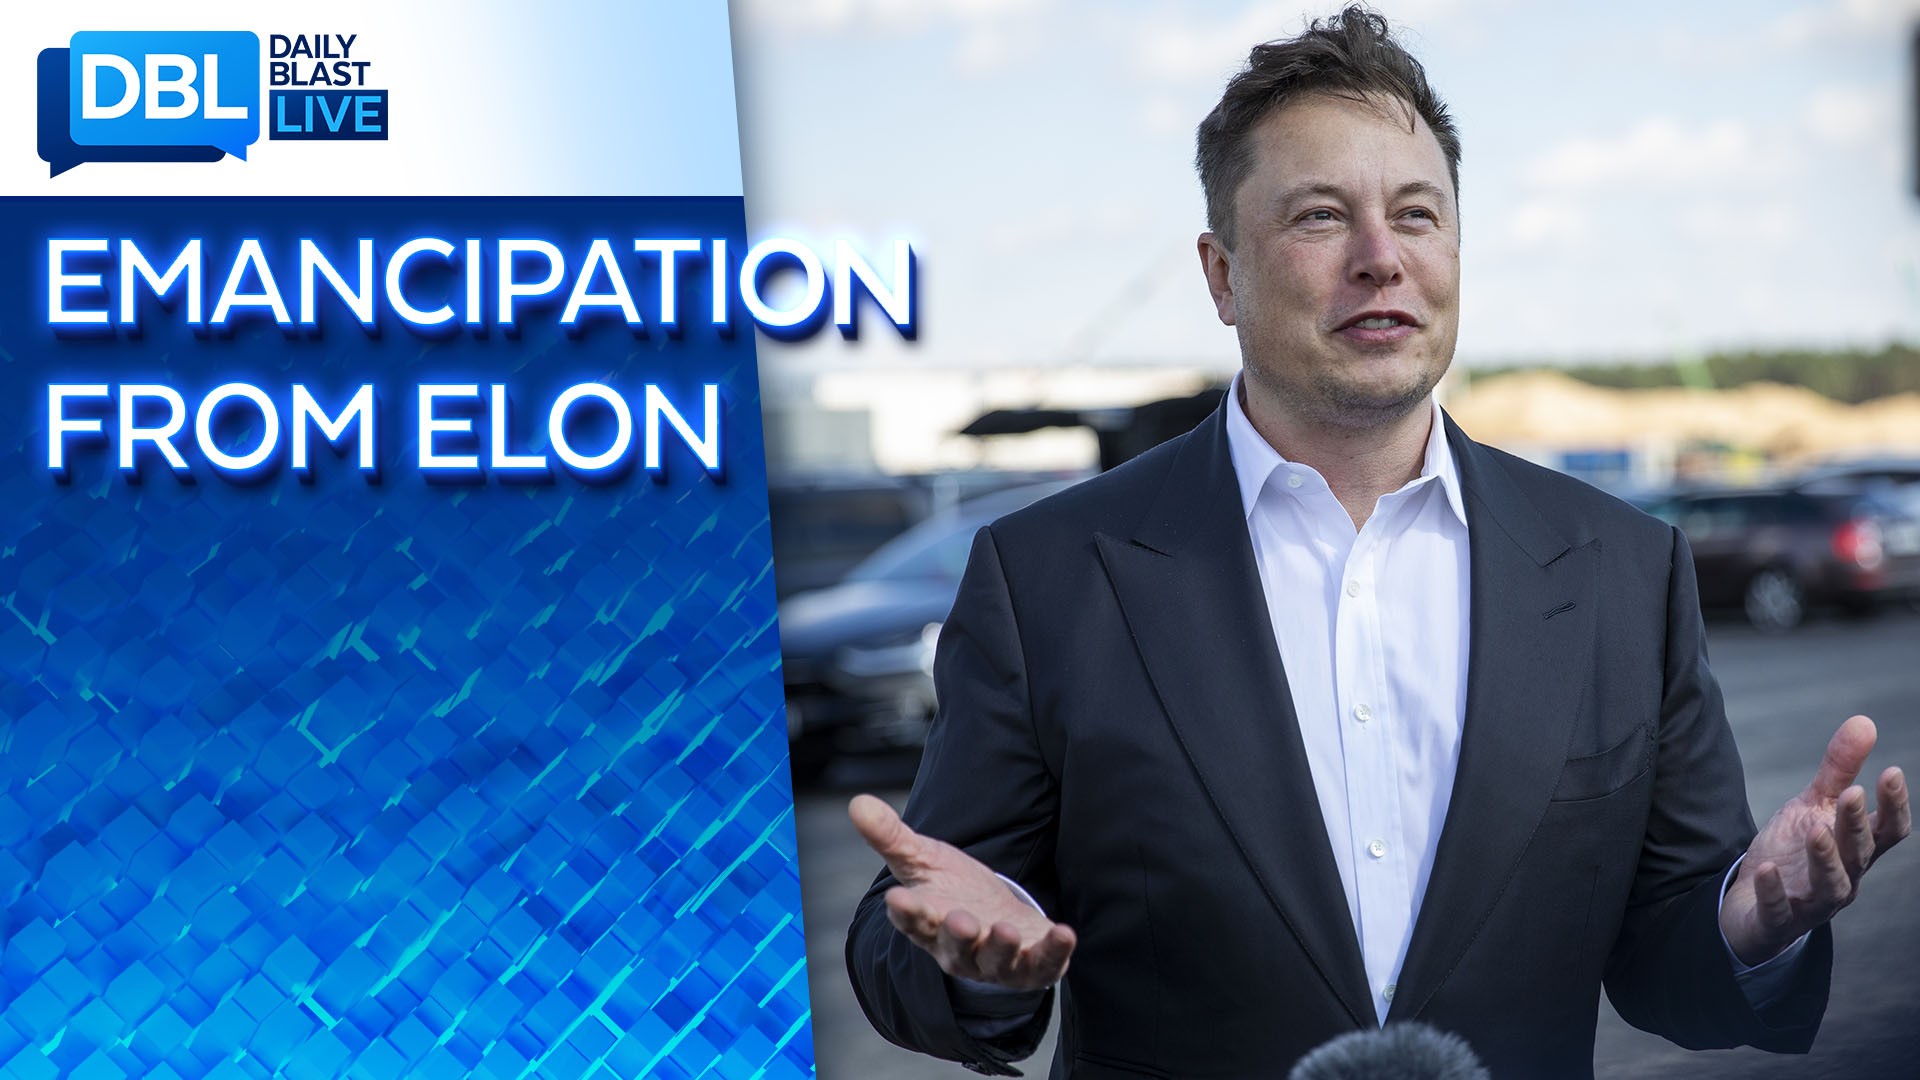 One of Elon Musk's children has decided to end their relationship with the richest man in the world.